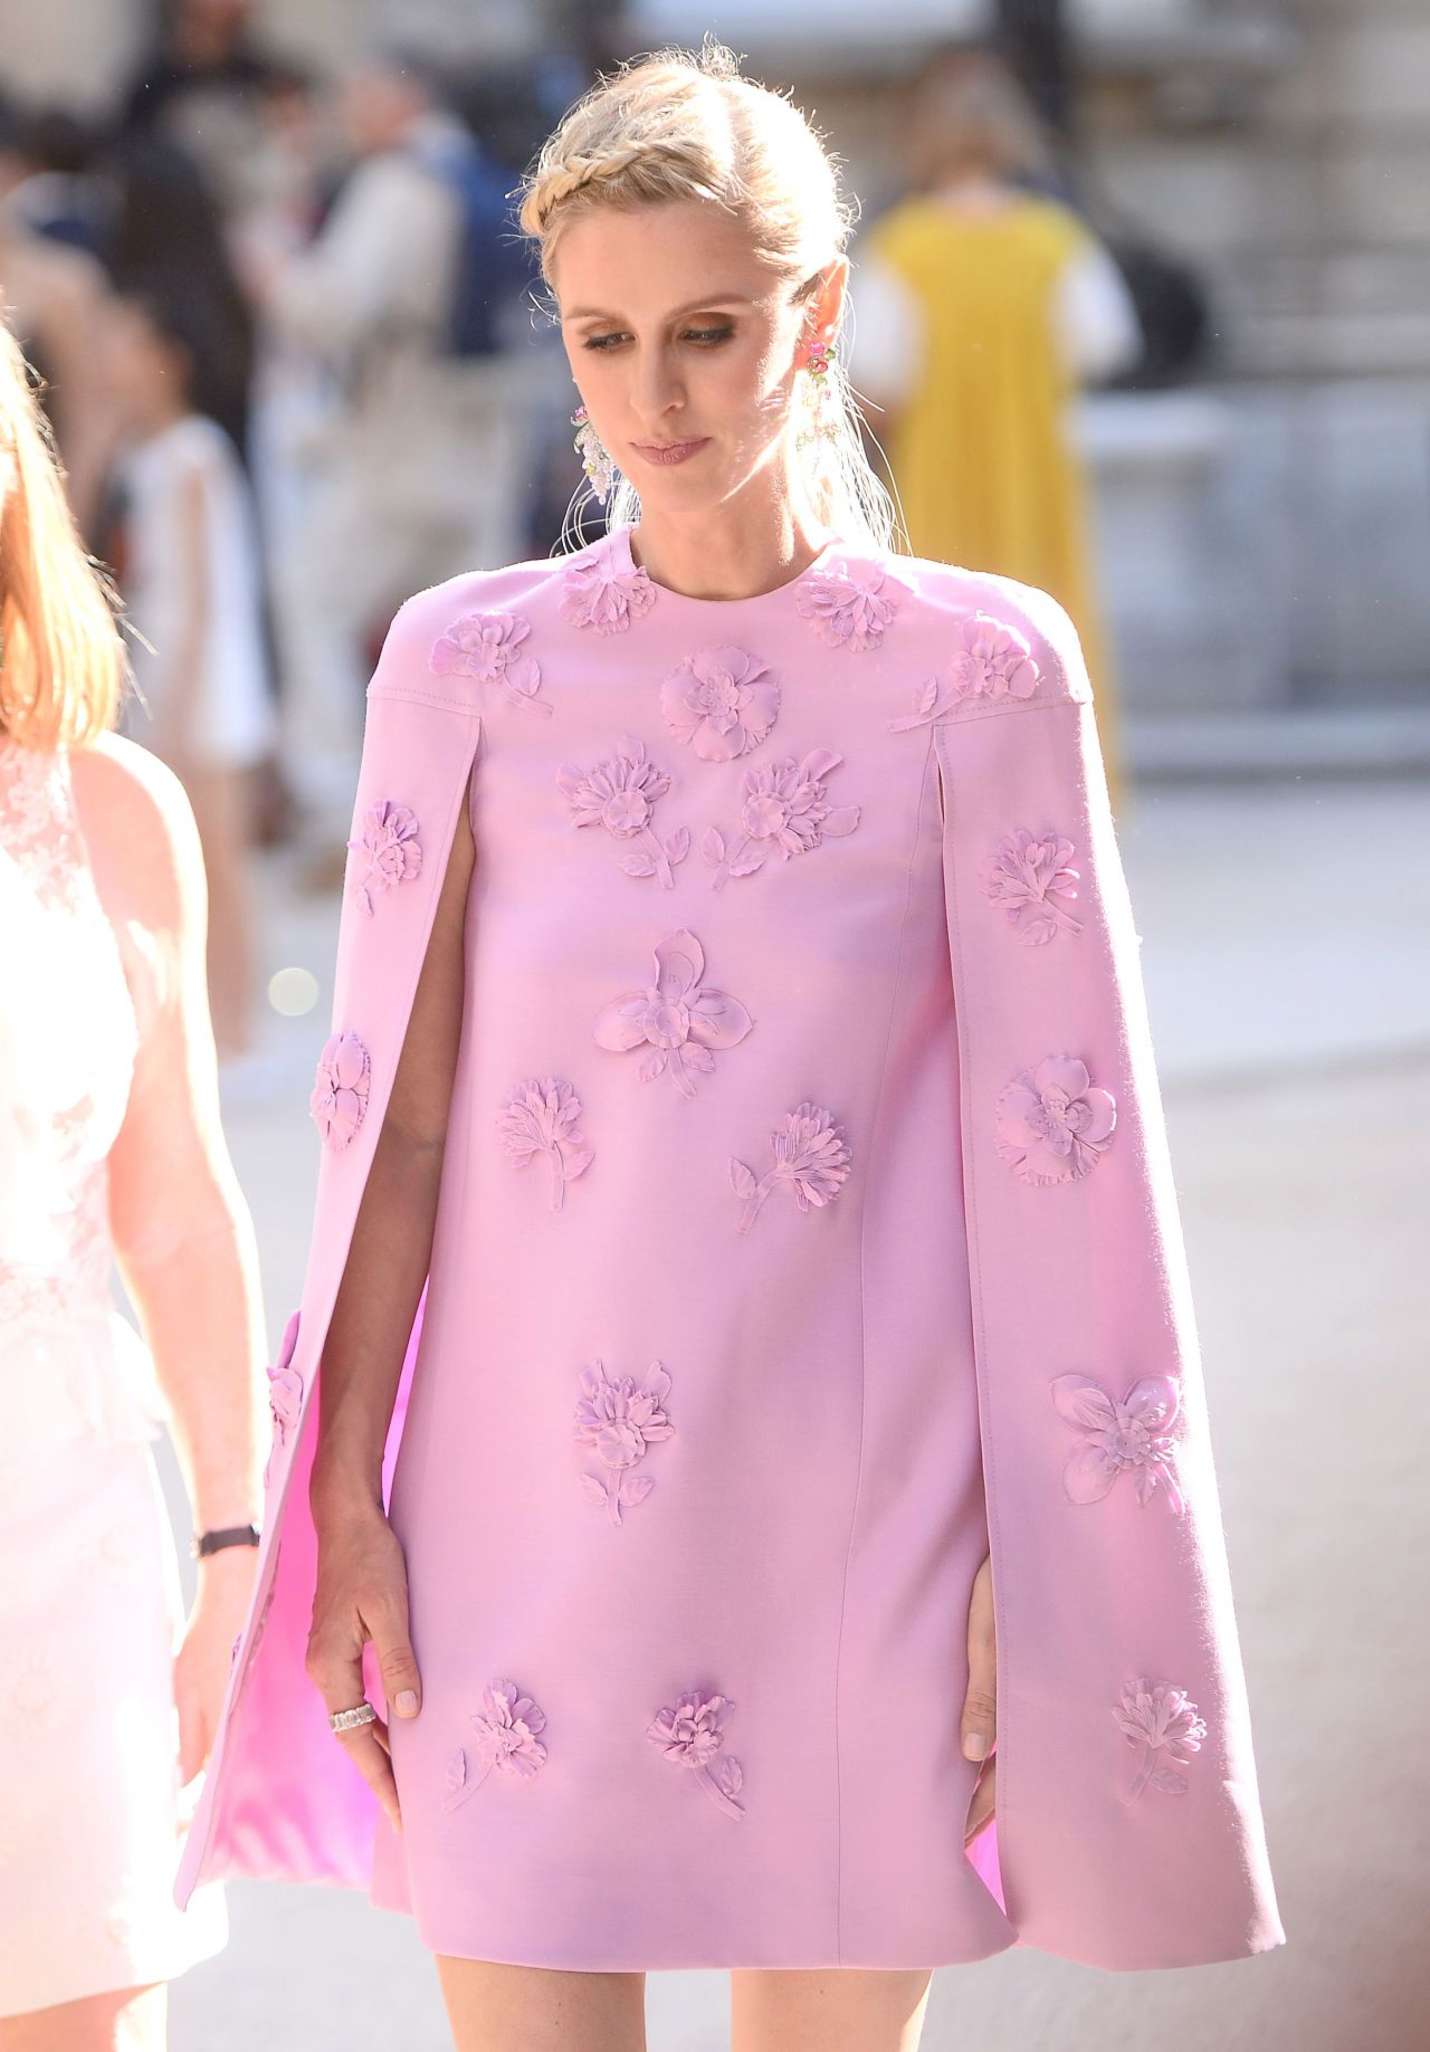 Nicky Hilton - Leaves the Valentino Fashion Show 2017 in Paris